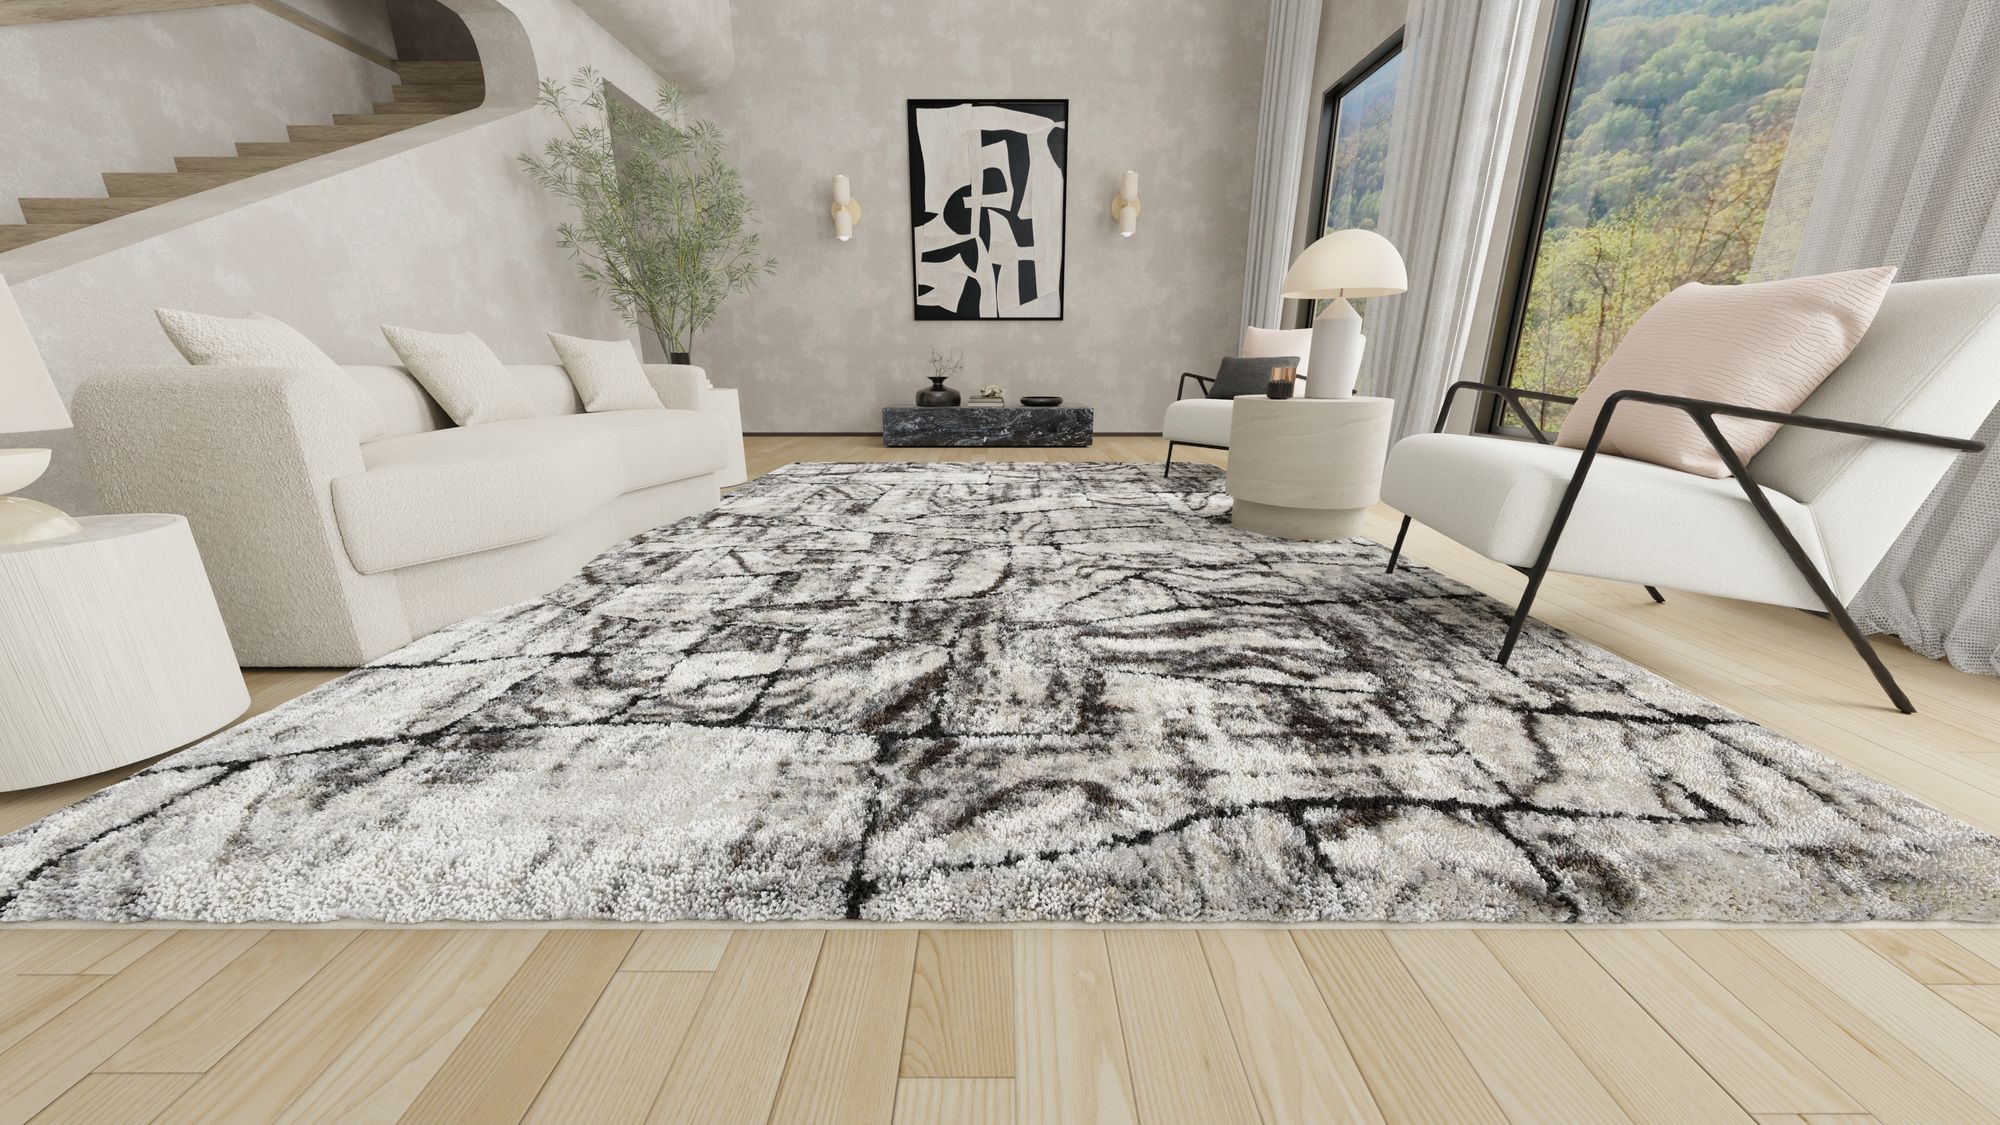 Luxurious white and black abstract Opal rug in a contemporary living room with white furniture, modern art, and large windows offering a scenic view.